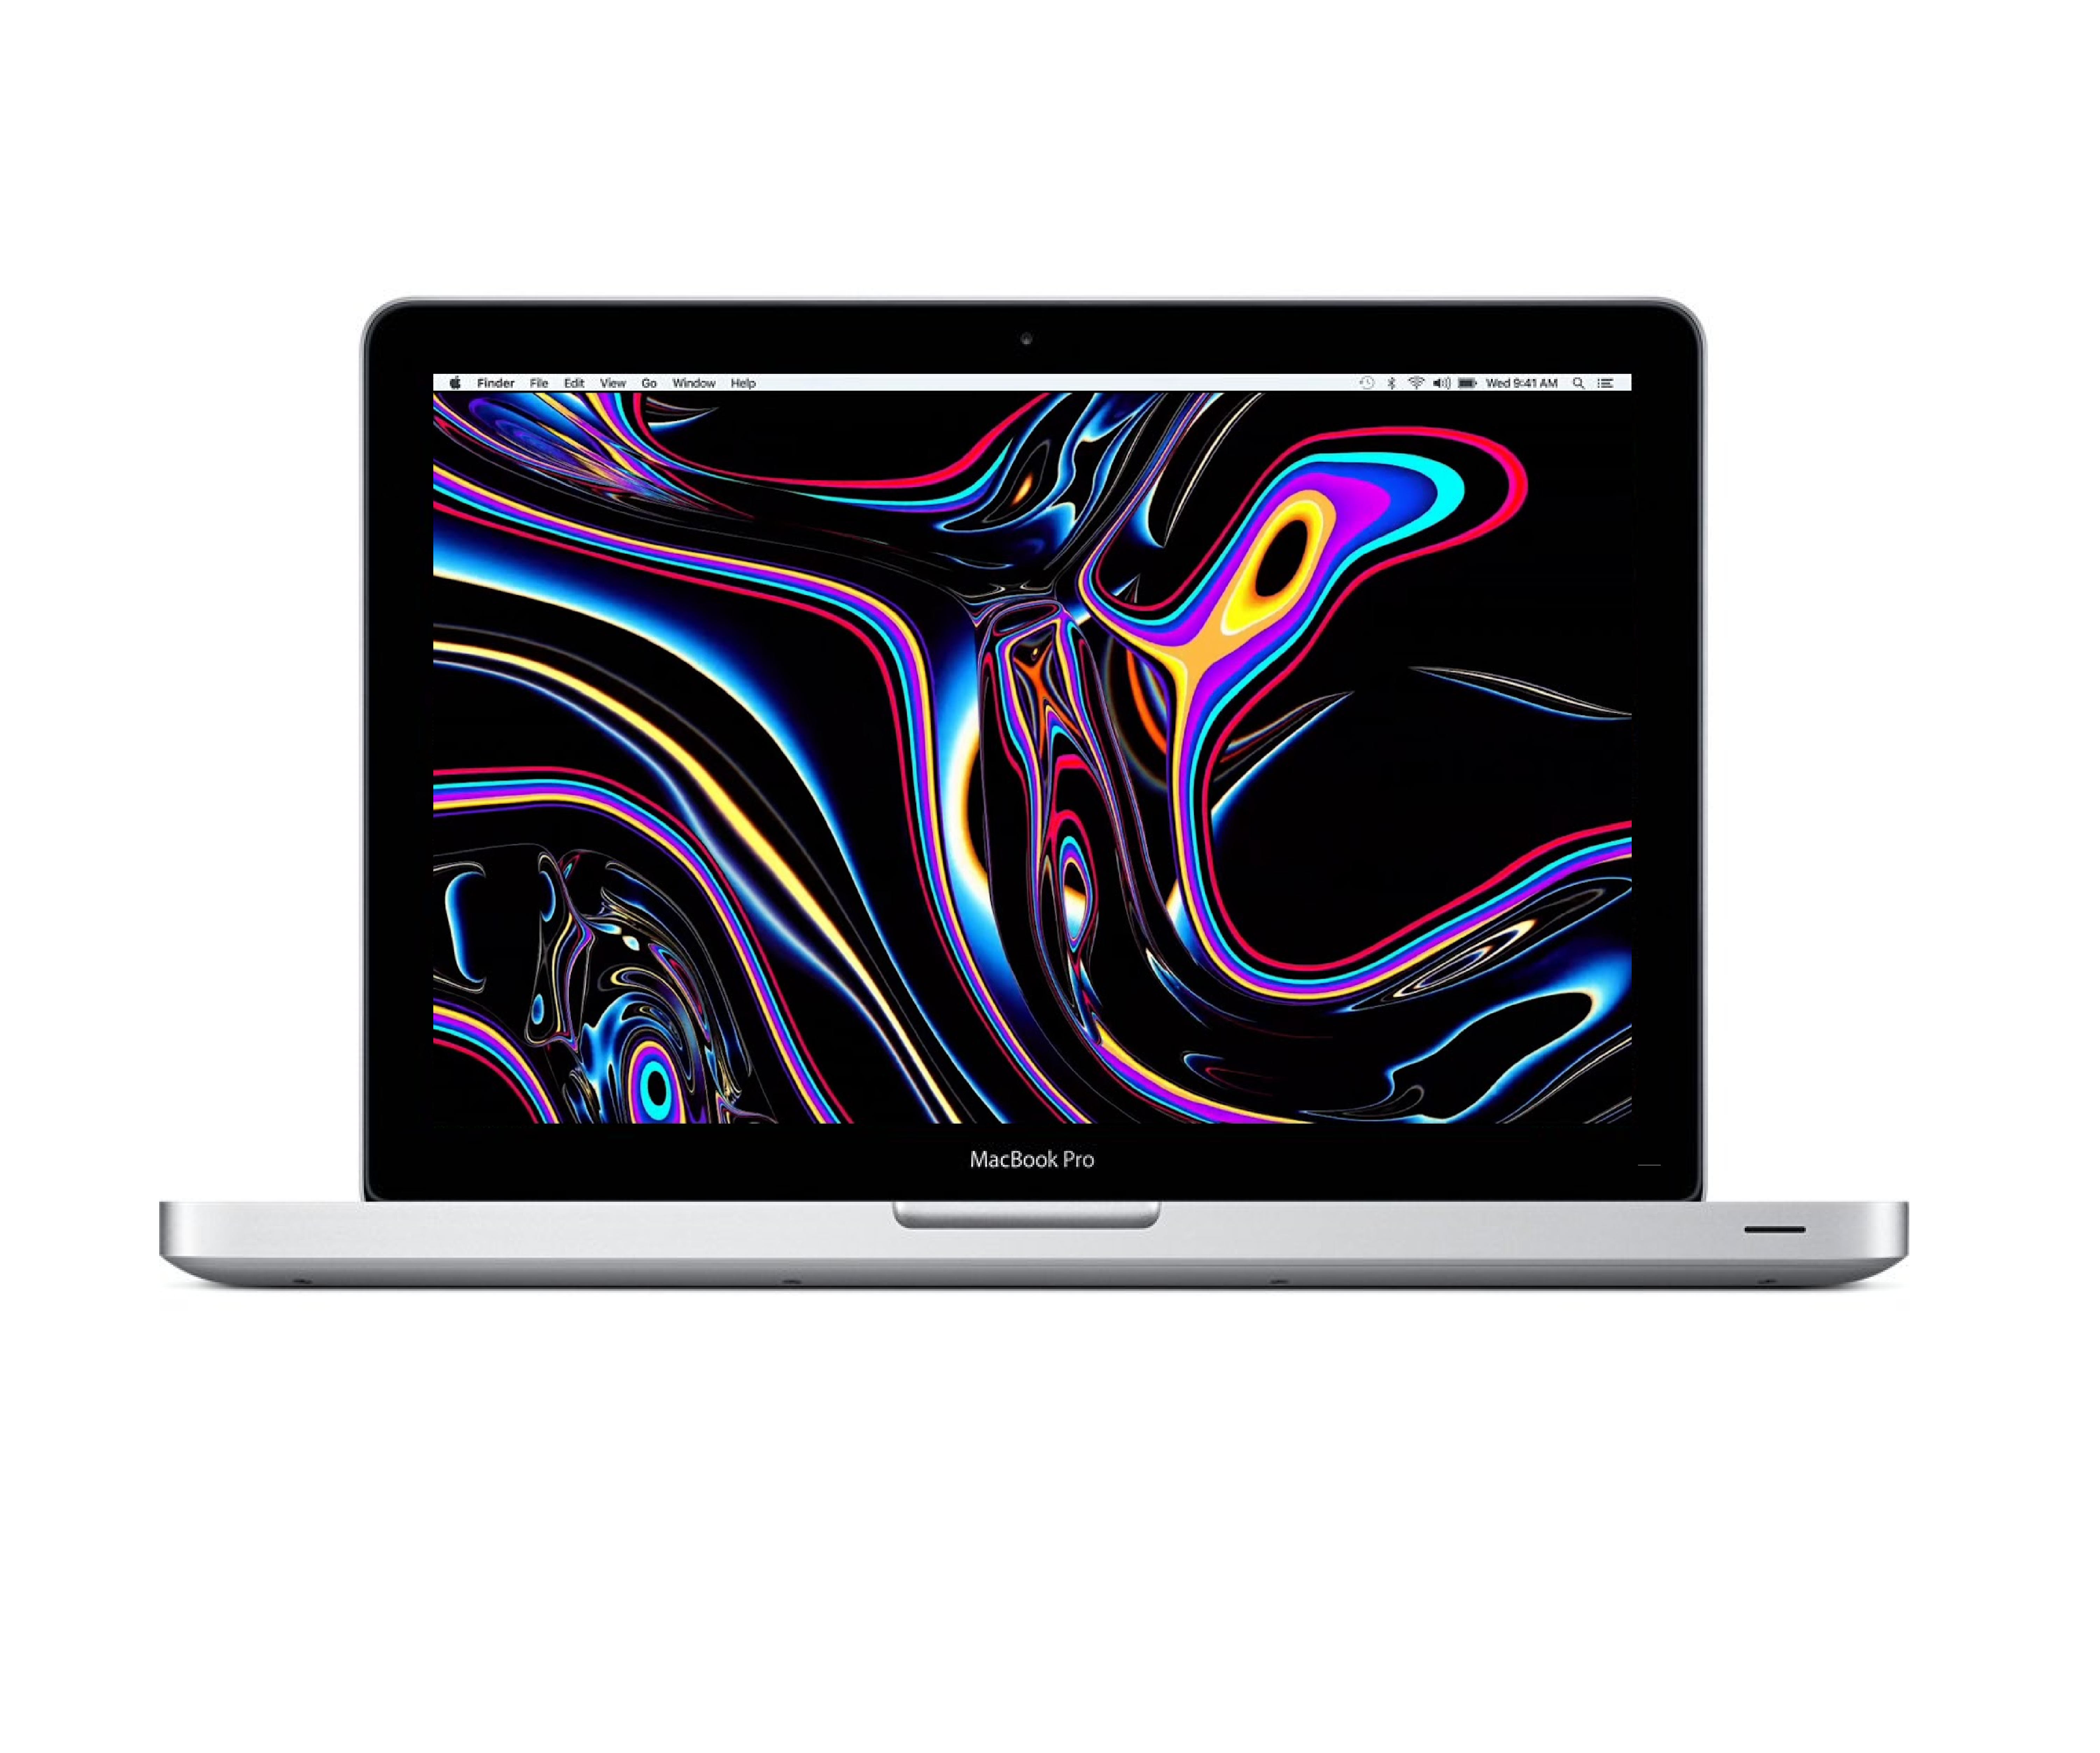 Restored Apple 13.3-inch MacBook Pro Laptop, Intel Core i5, 4GB RAM, Mac OS, 500GB HDD, Bundle Includes: Black Case, Bluetooth Headset, Wireless Mouse - Silver (Certified ) (Refurbished) - image 4 of 4